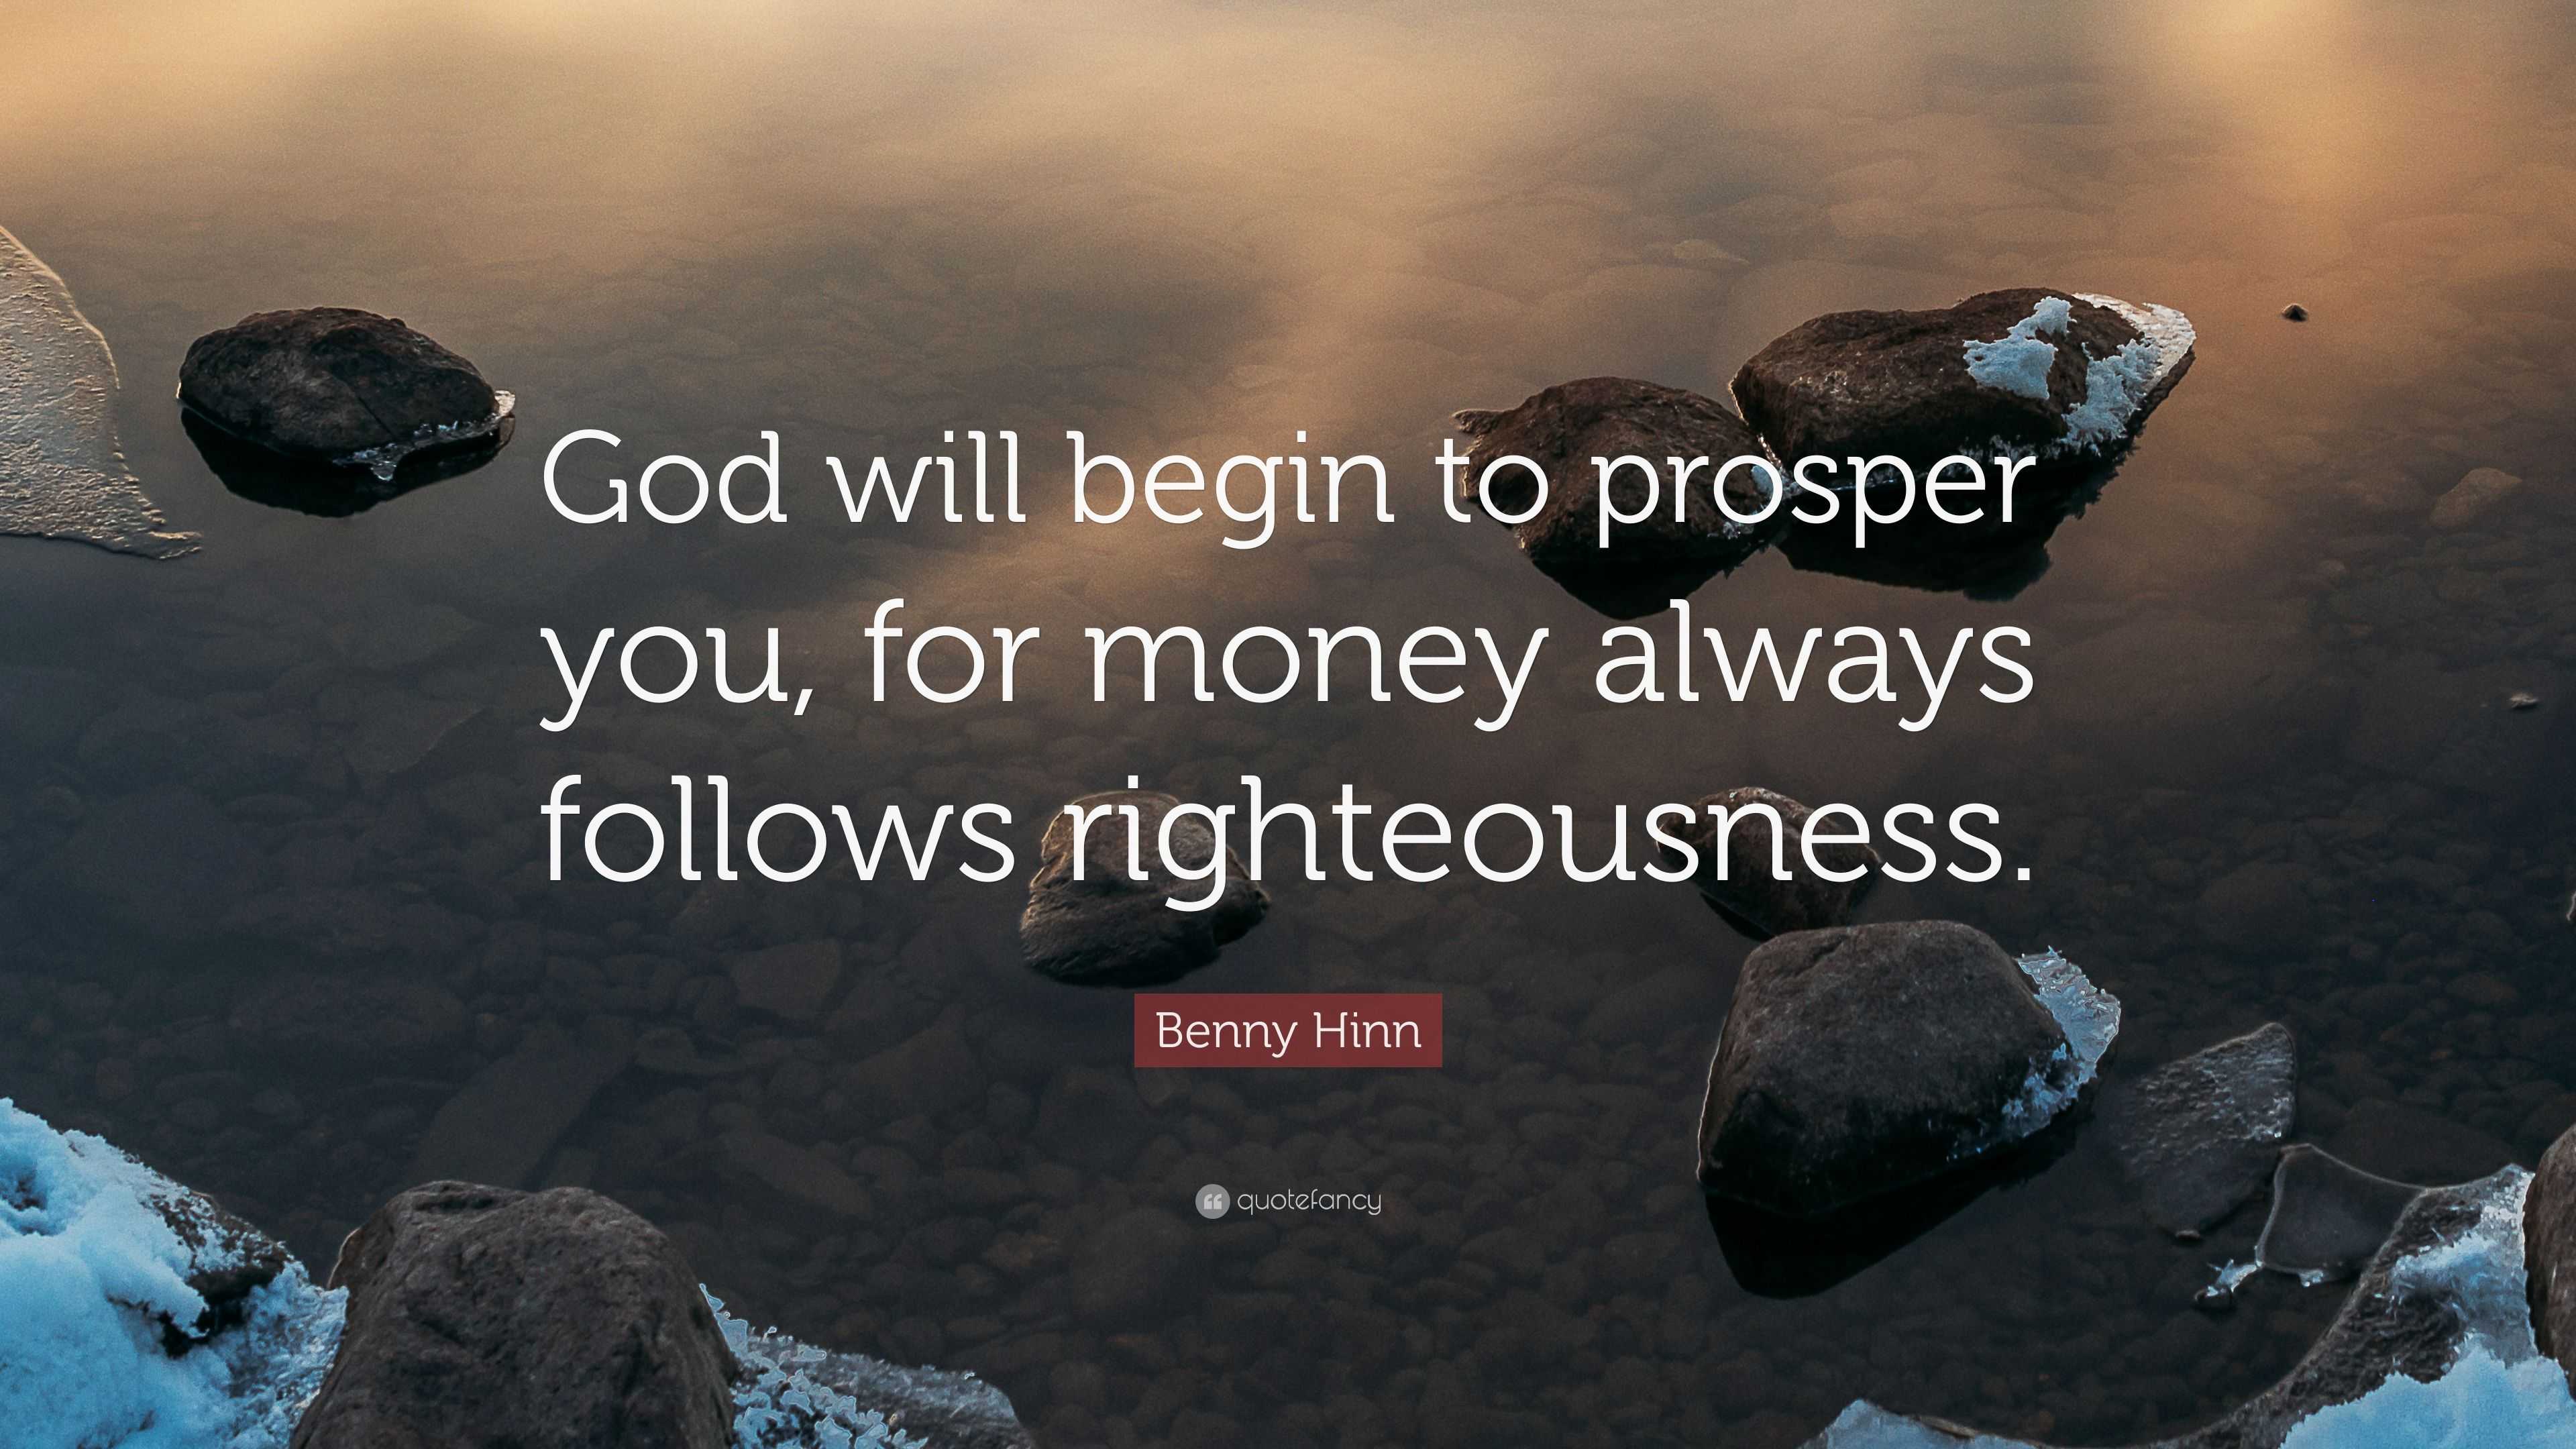 Benny Hinn Quote: “God will begin to prosper you, for money always follows  righteousness.”